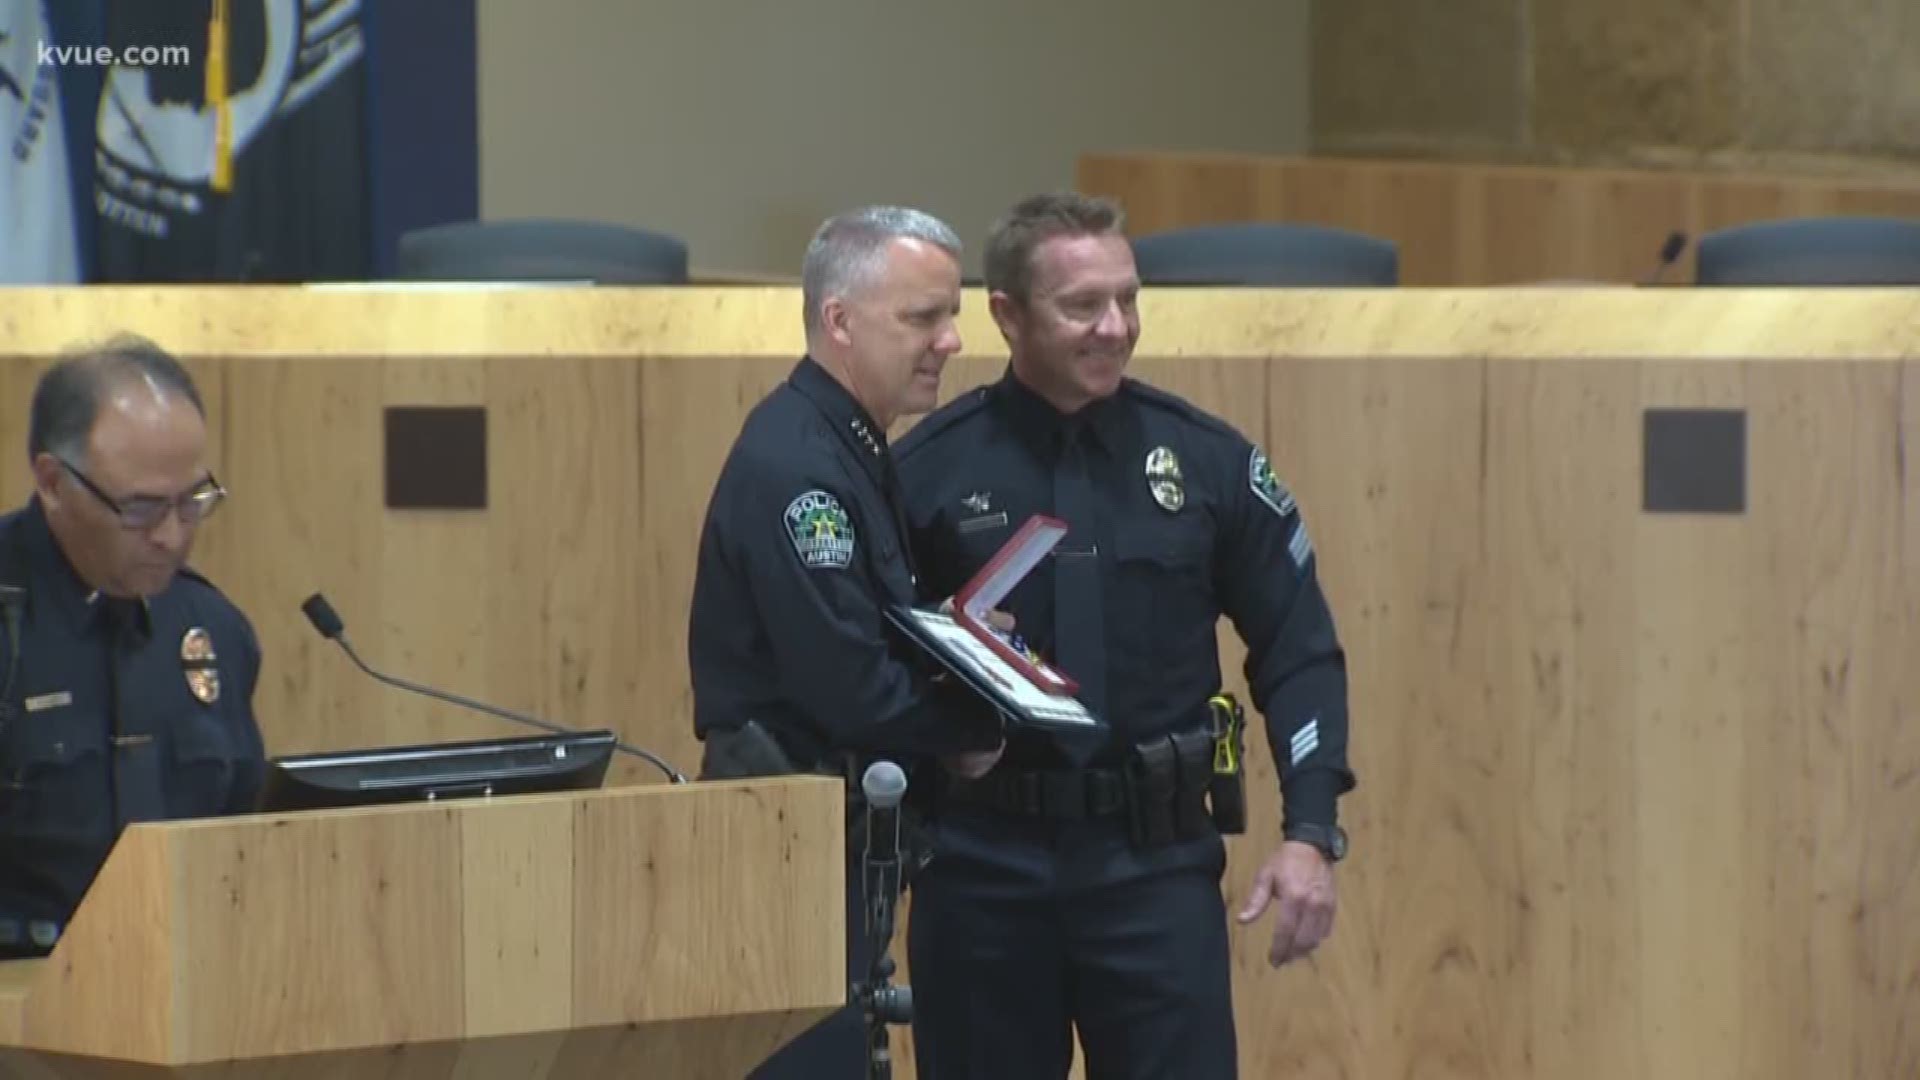 Interim Austin police Chief Brian Manley and the Austin Police Department Executive Staff honored the APD Bomb Squad and members of the SWAT Team who served during the March bombing investigation Thursday morning.